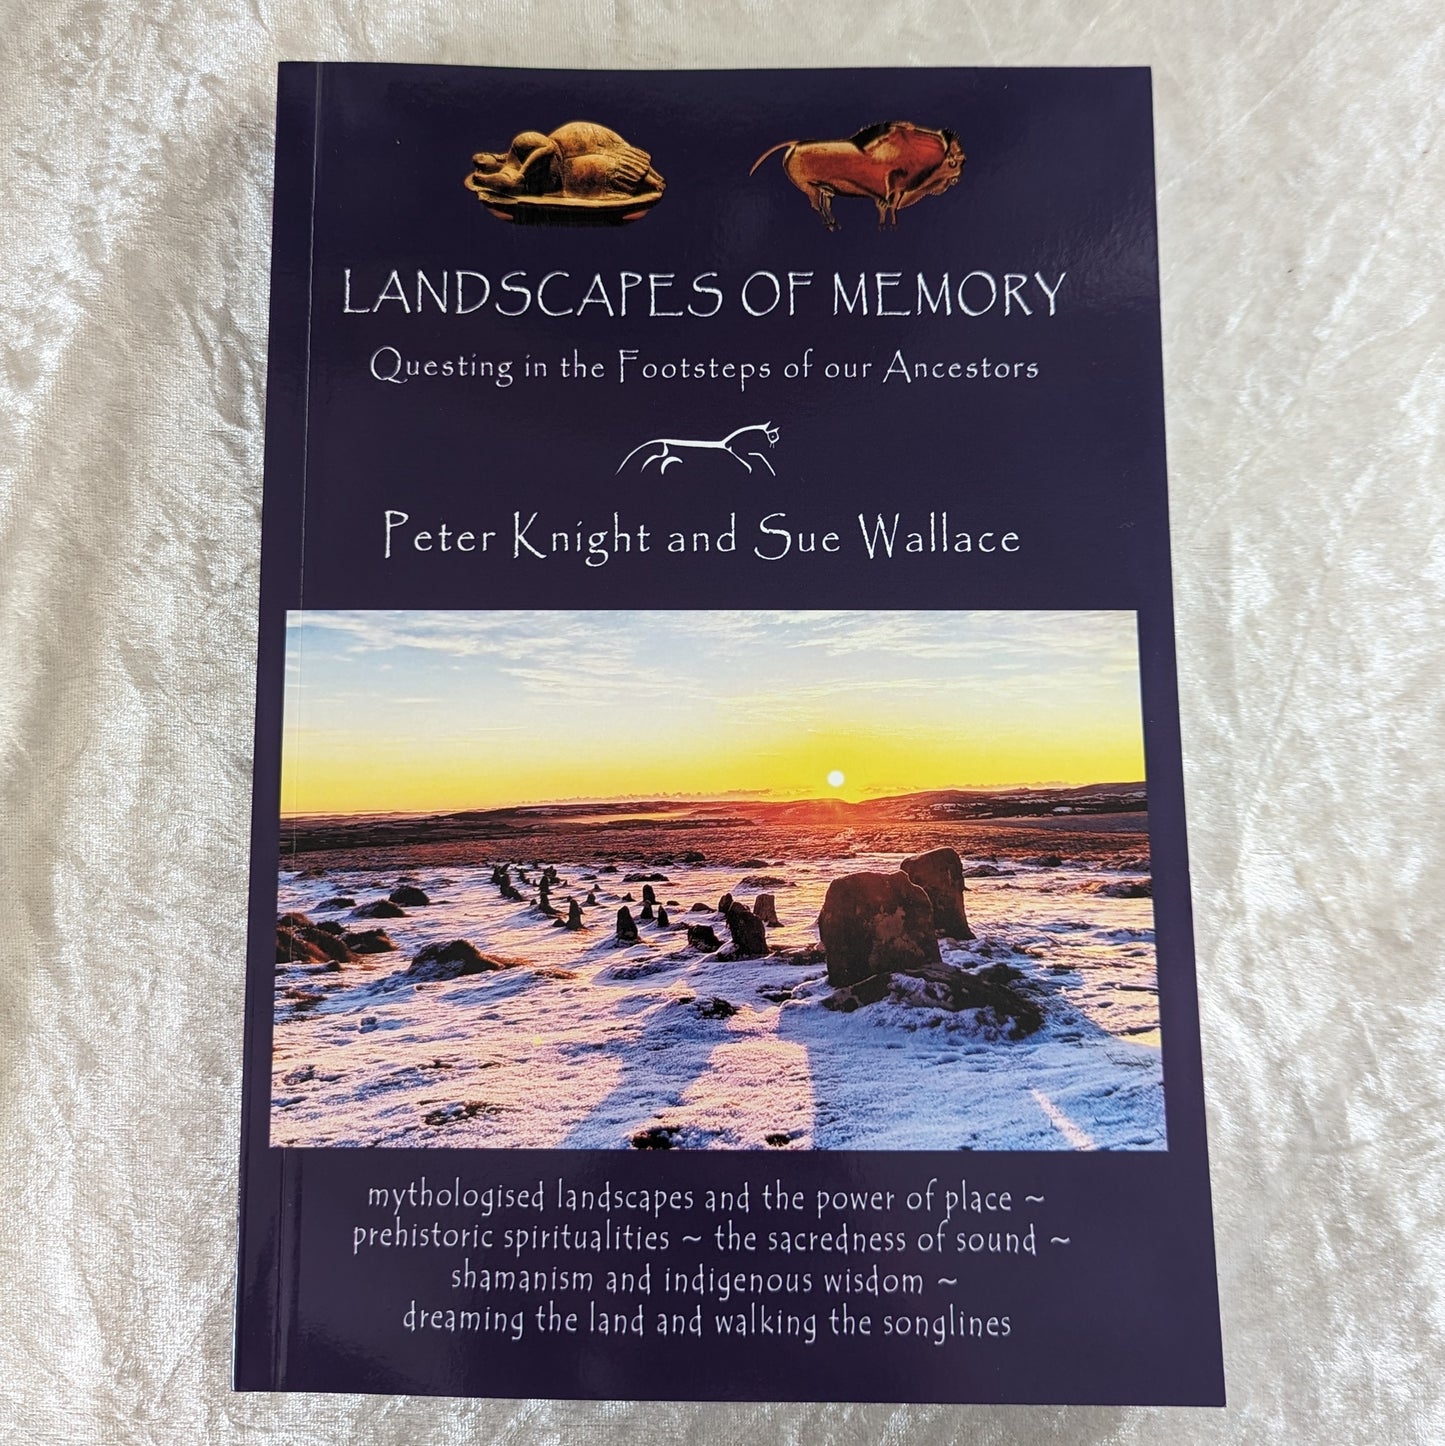 Landscapes of Memory - Questing in the footsteps of our Ancestors